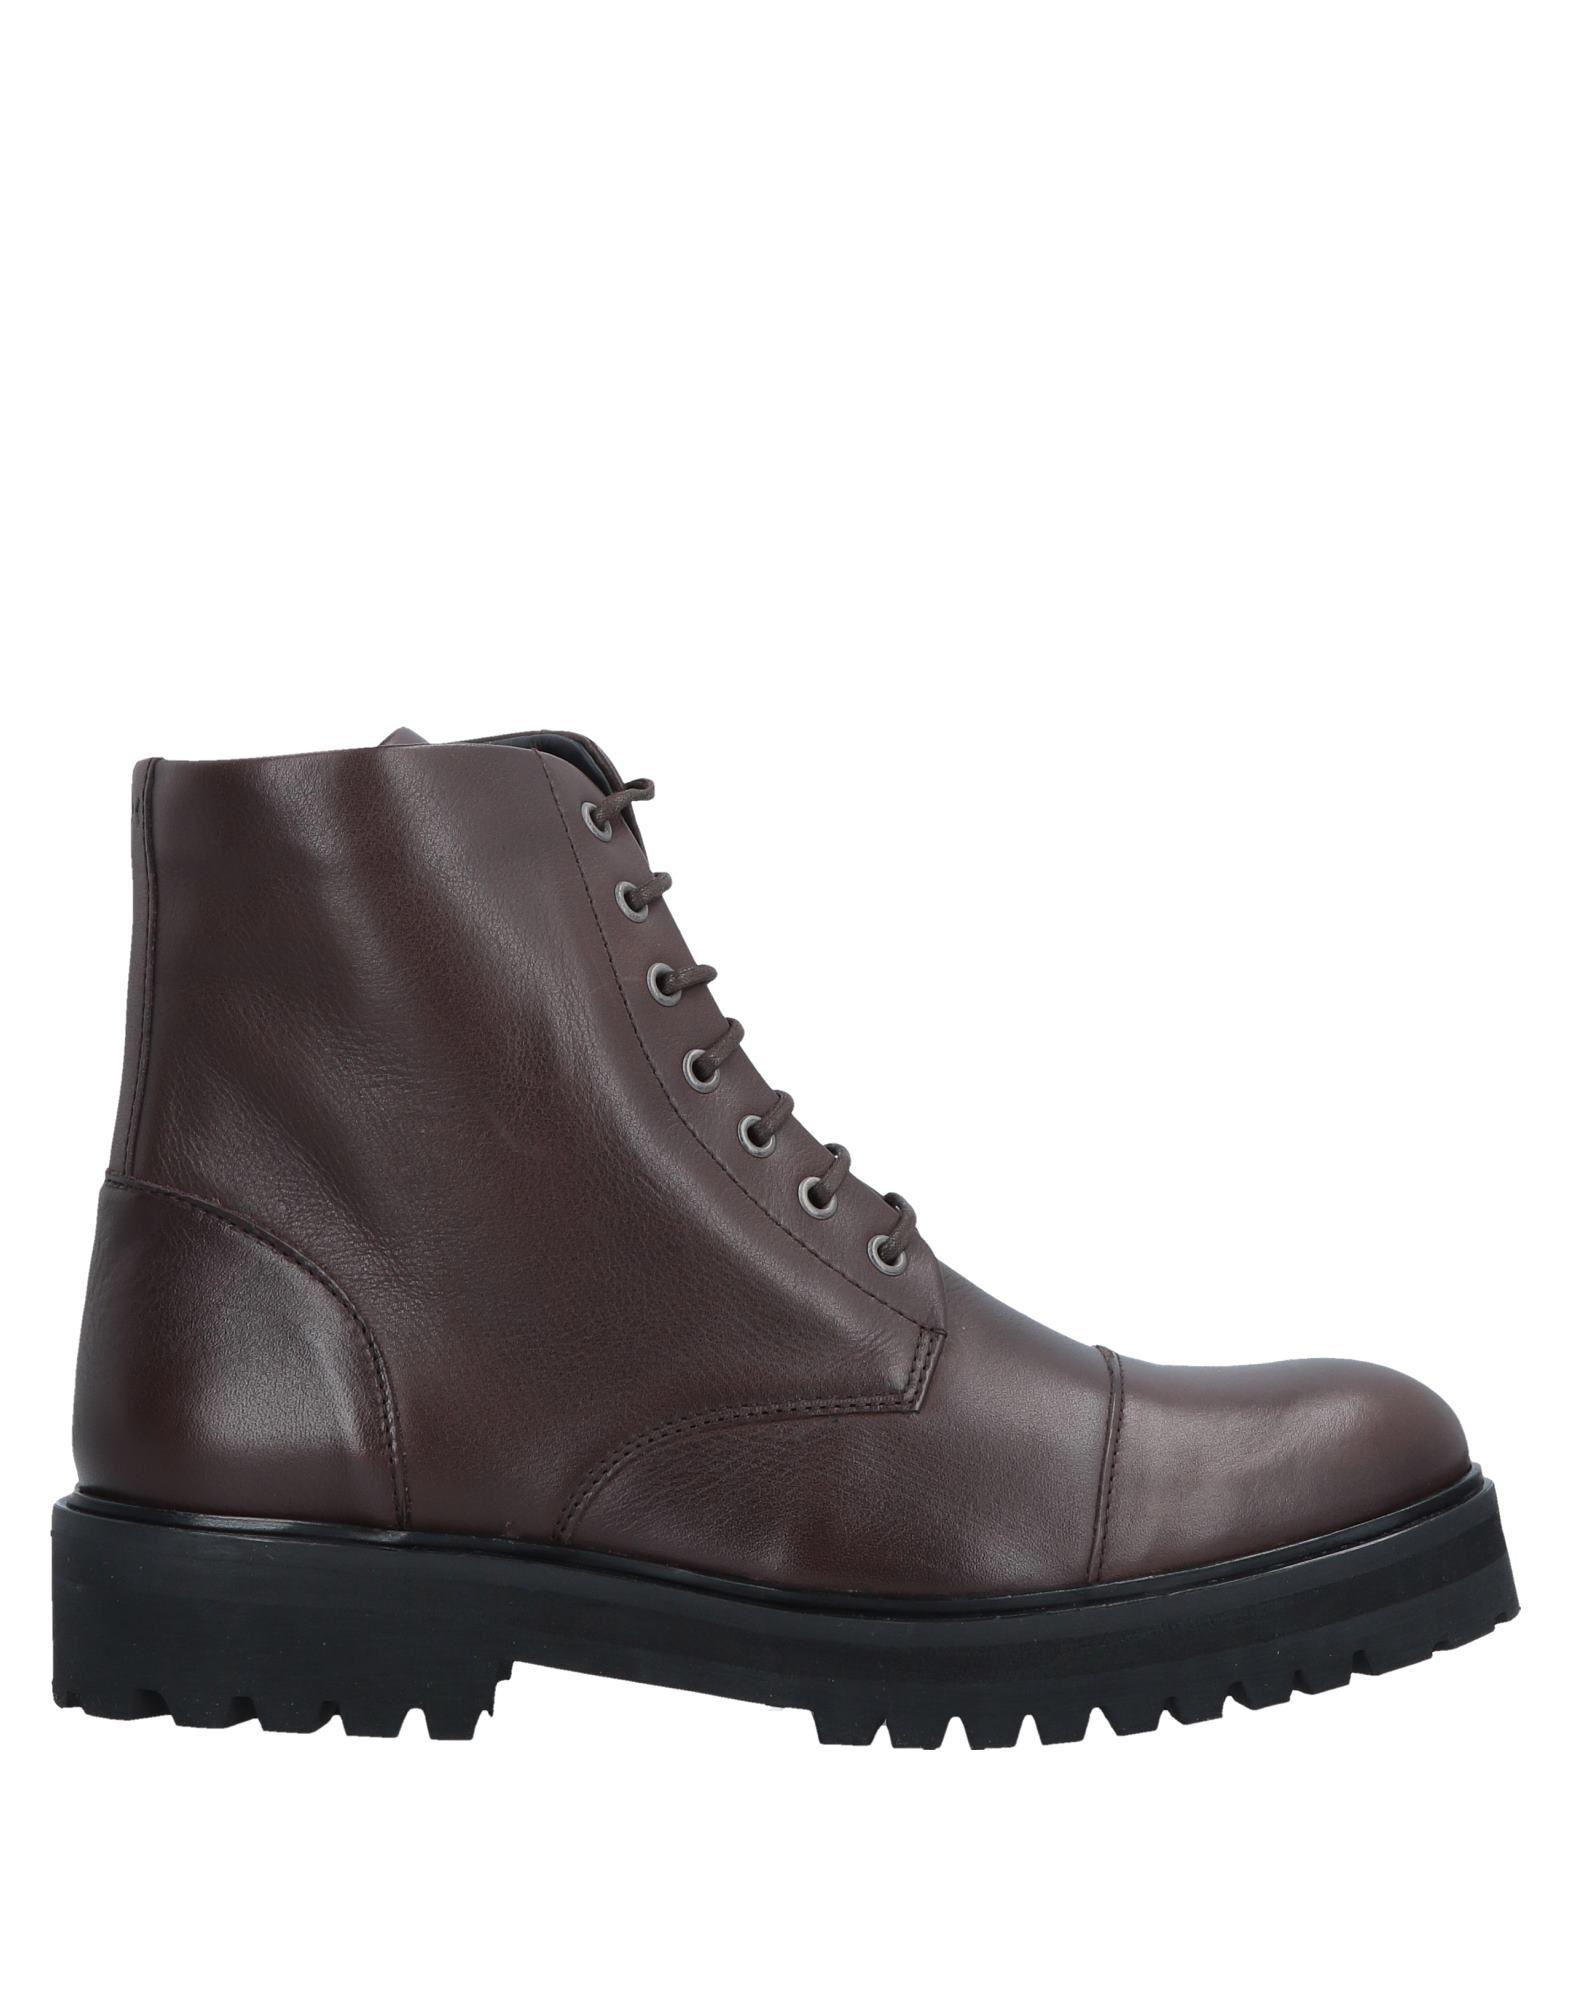 Royal Republiq Leather Ankle Boots in Dark Brown (Brown) - Lyst